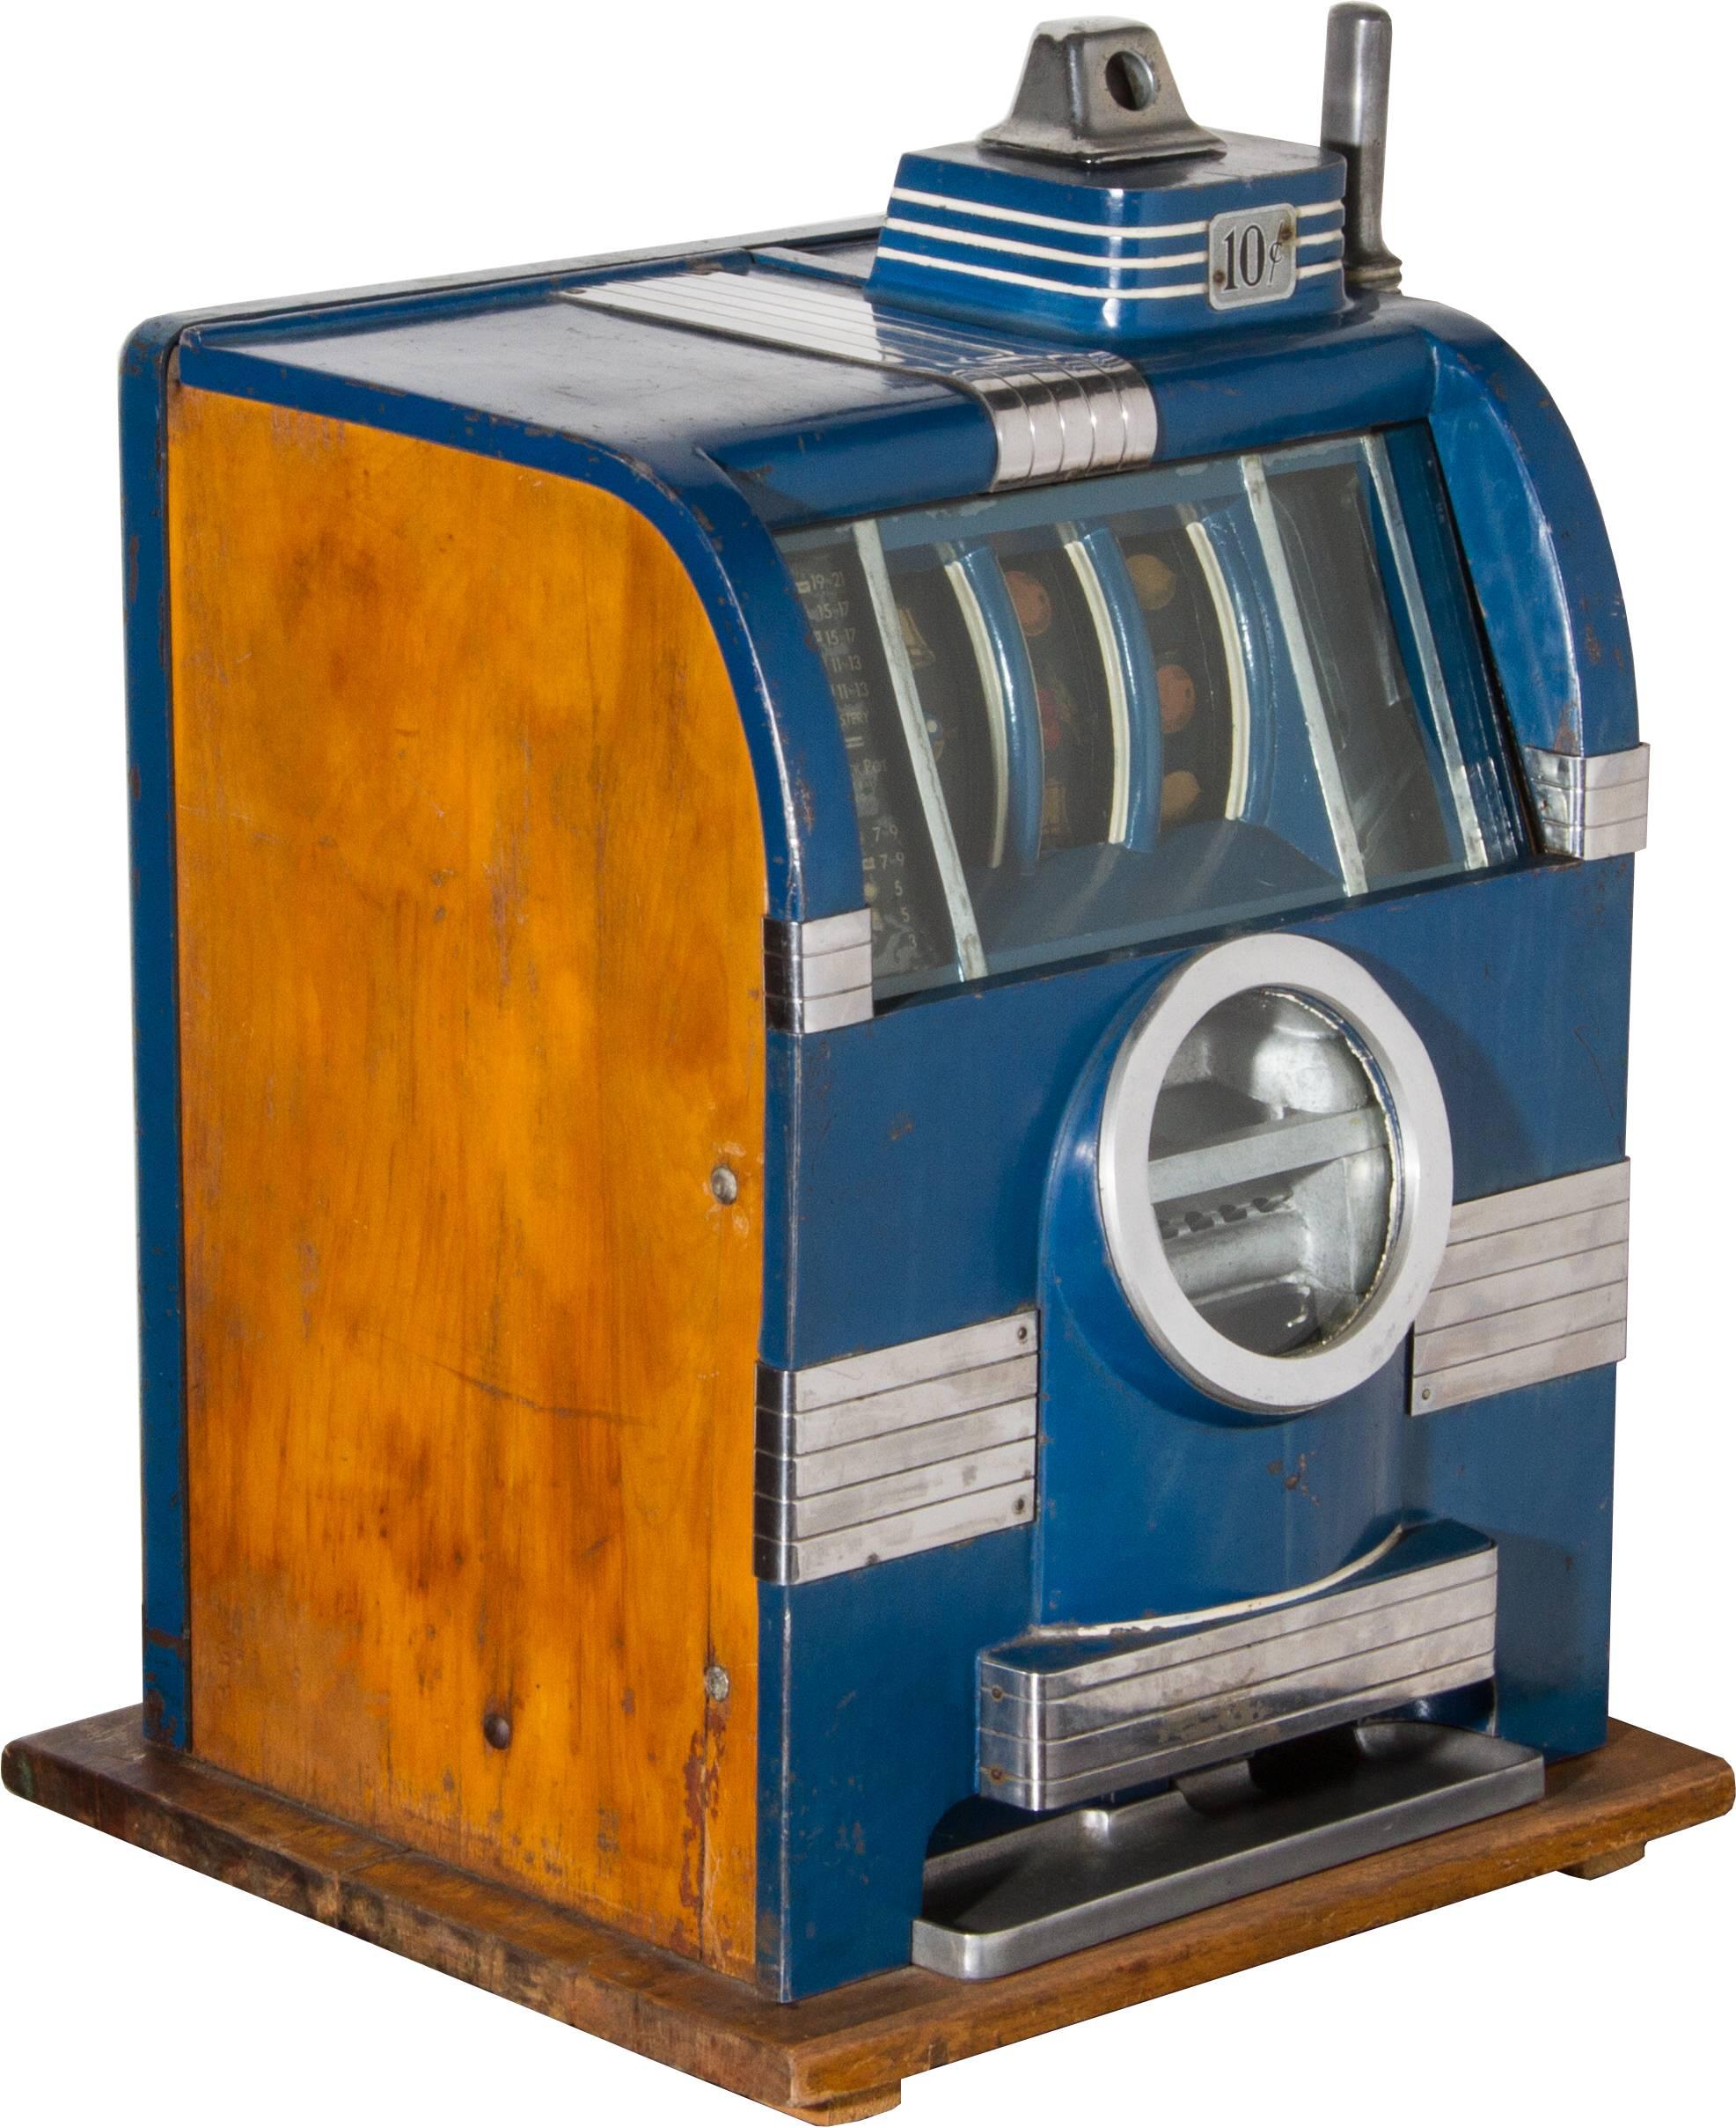 This is a working 10 cent Art Deco slot machine in original condition.